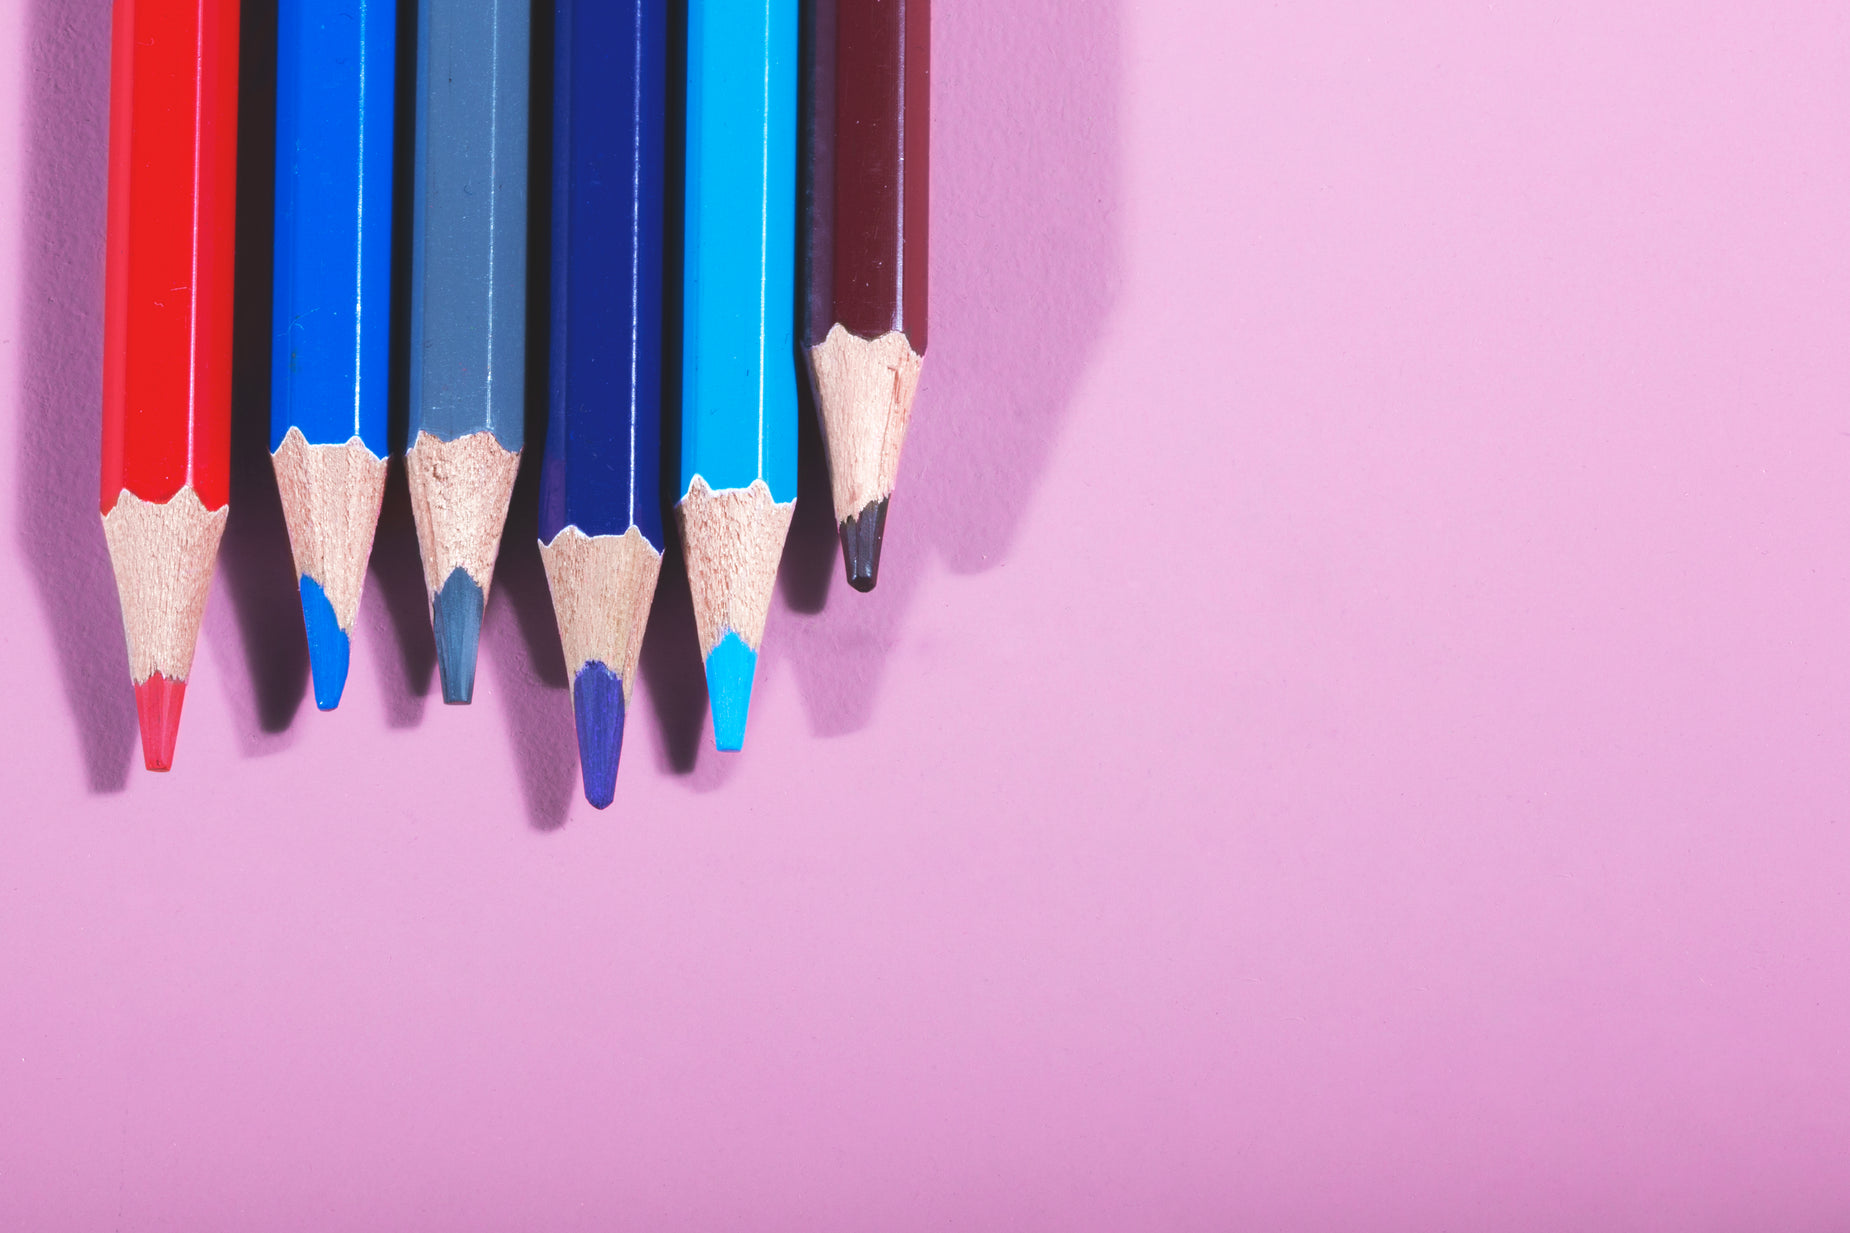 six pencils in four colors leaning on the wall